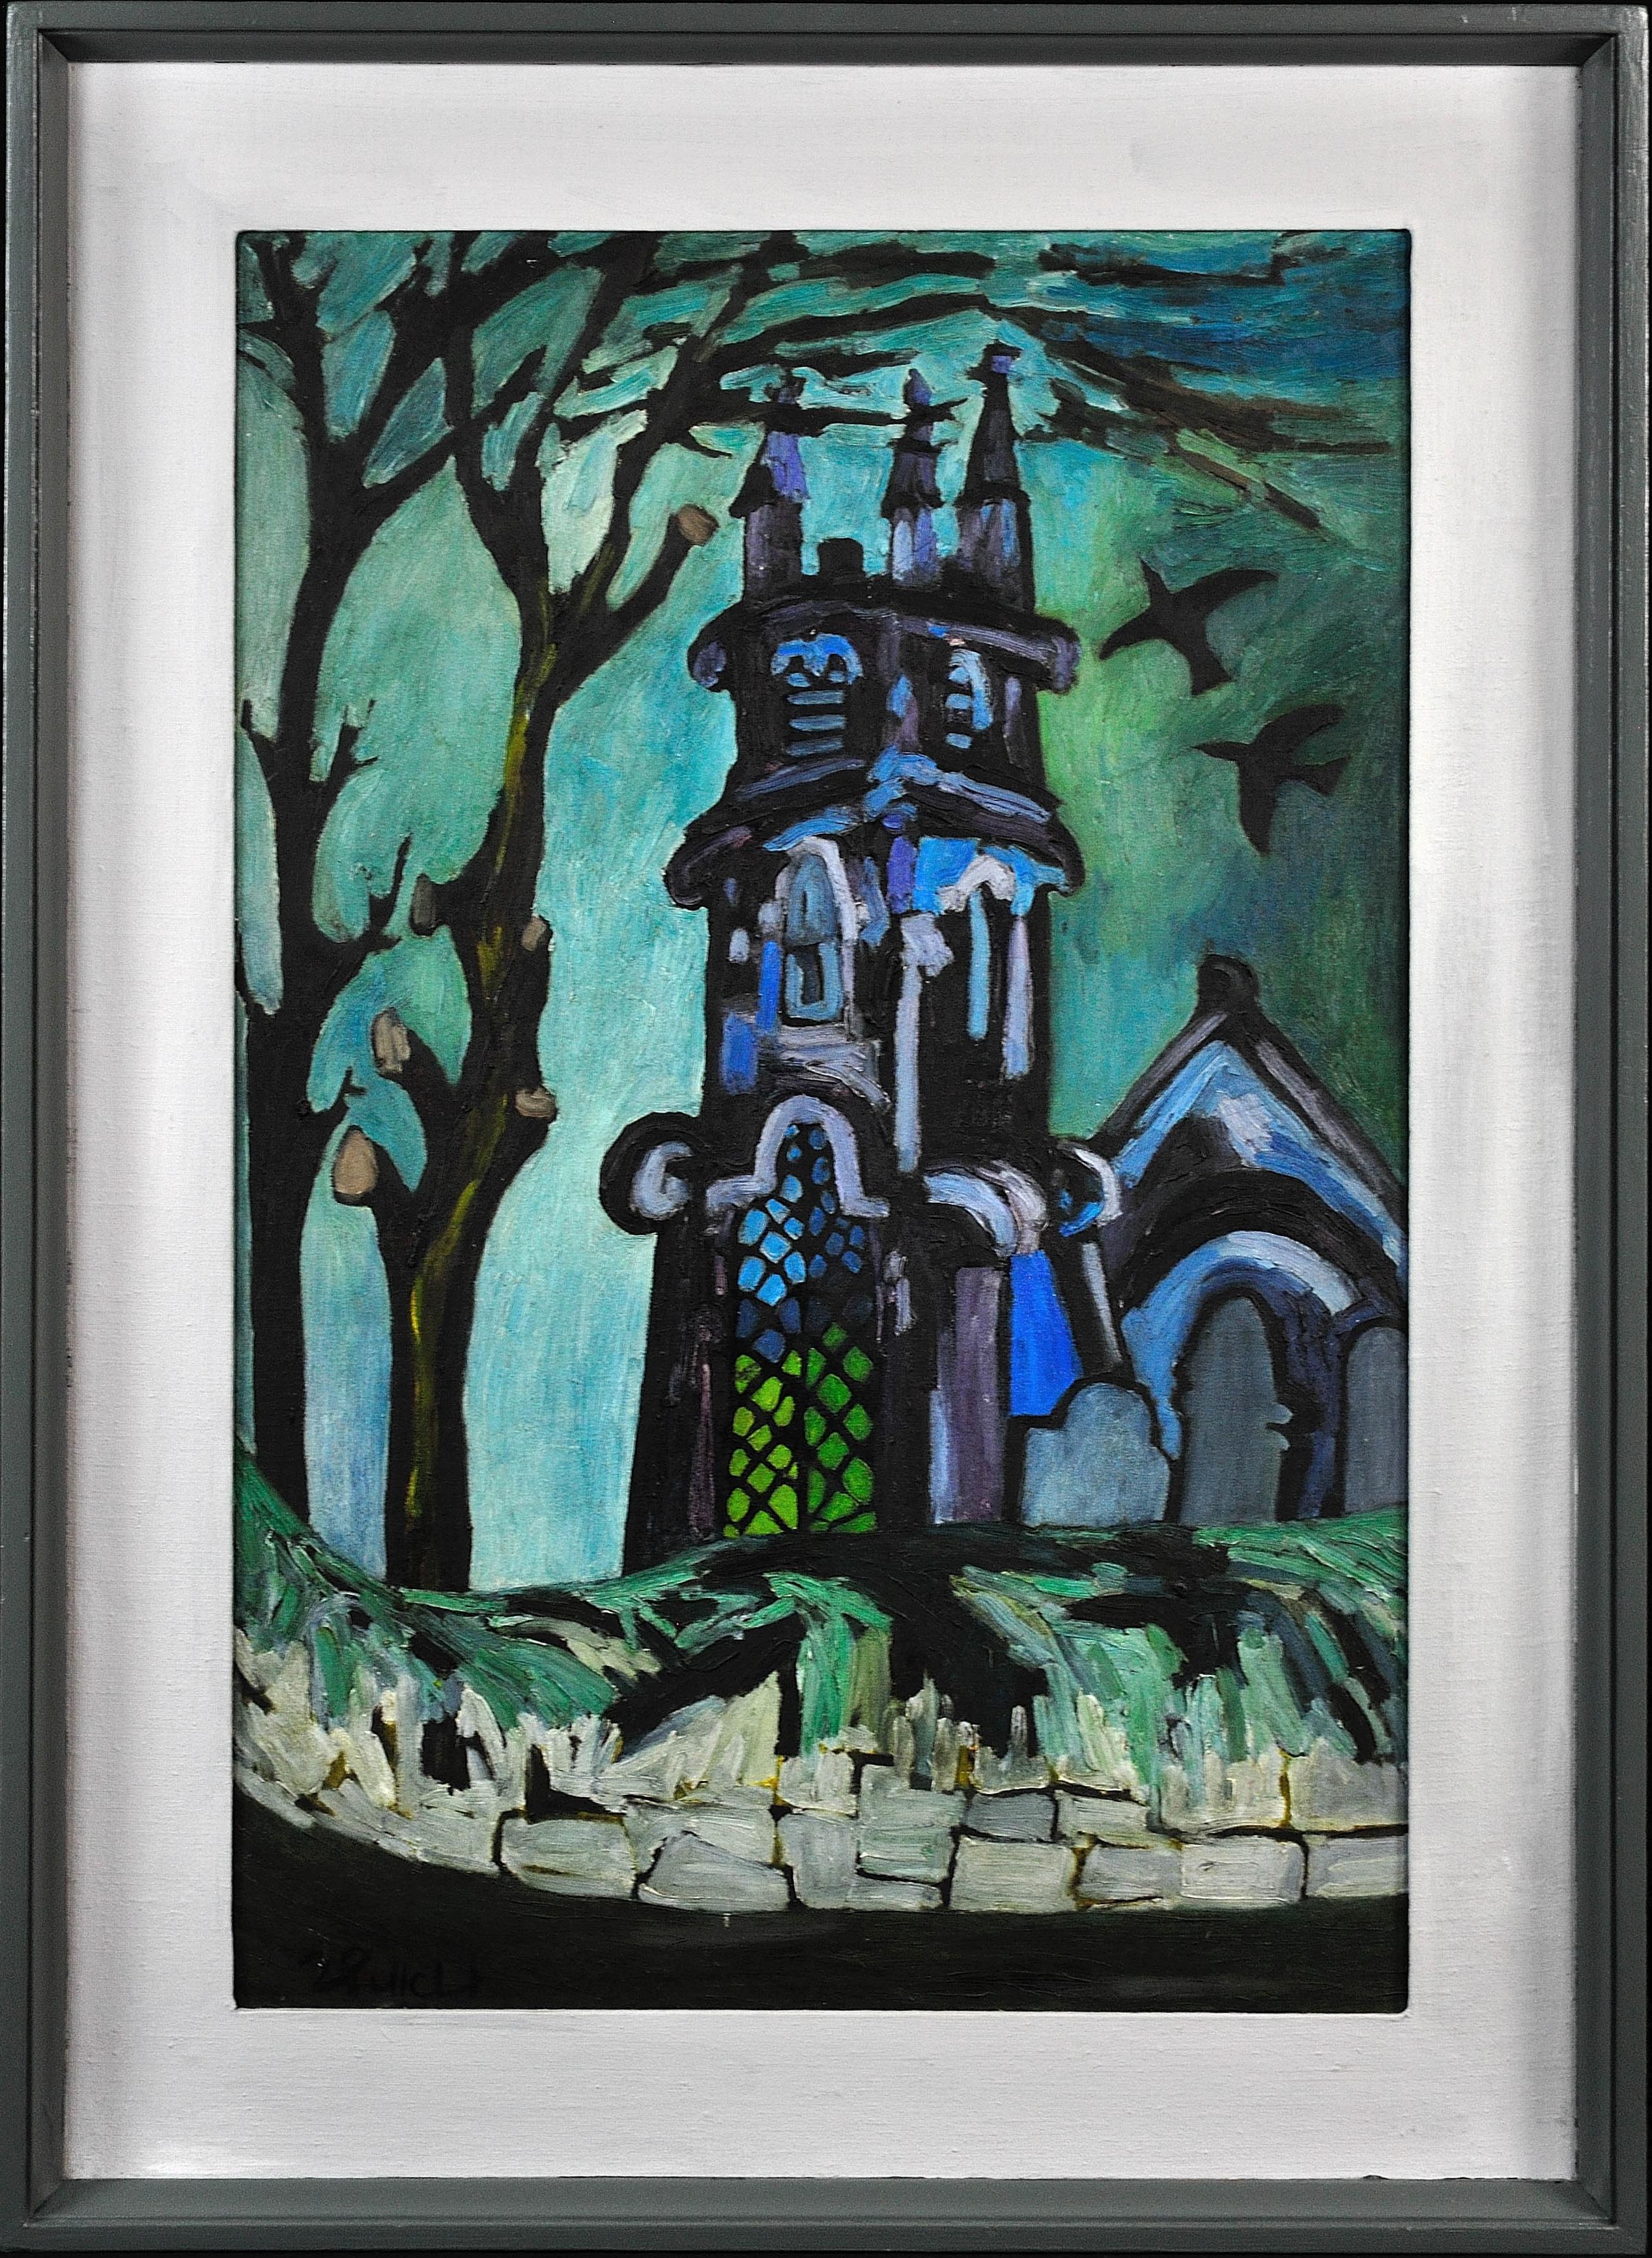 Joan Gillchrest. 
English ( b.1918 - d.2008 ).
Church and Churchyard.
Oil on Board. Signed.
Image size 33.9 inches x 21.8 inches ( 86cm x 55.5cm ).
Frame size 42.3 inches x 30.3 inches ( 107.5cm x 77cm ).

Available for sale; this original oil